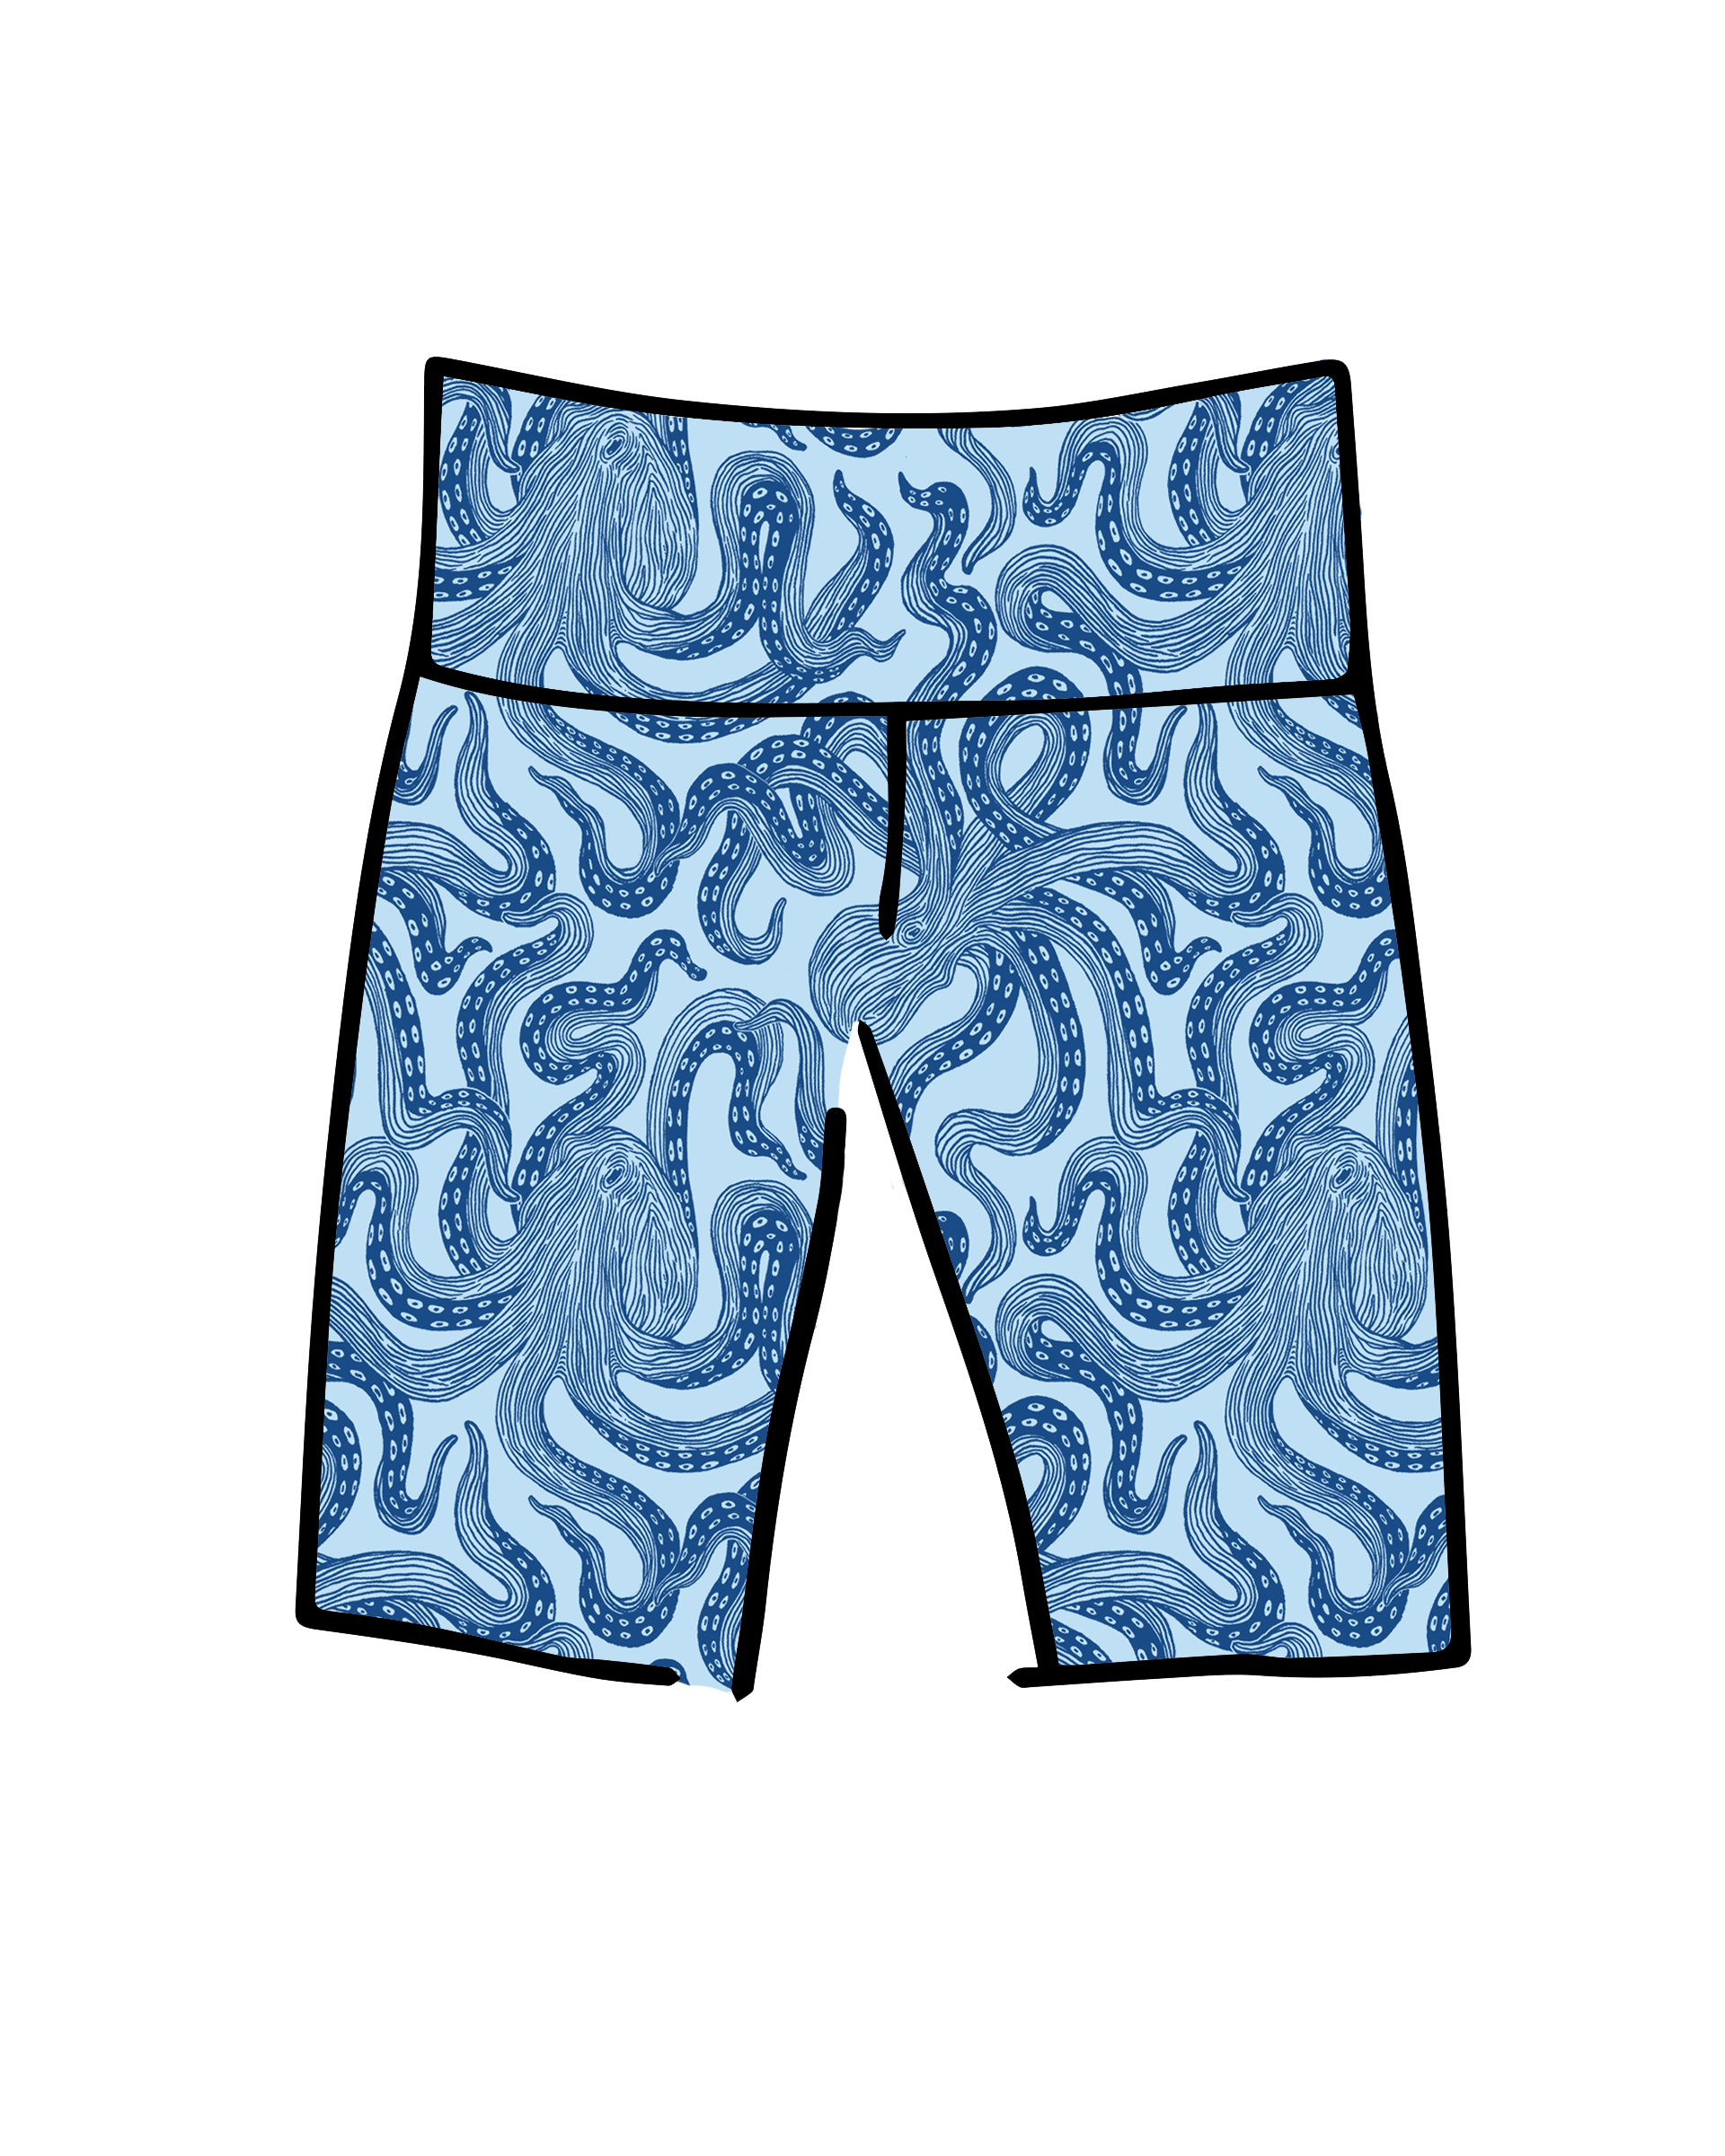 Drawing of Thunderpants Bike Shorts in Octo-Pants print - dark blue octopus on light blue fabric.